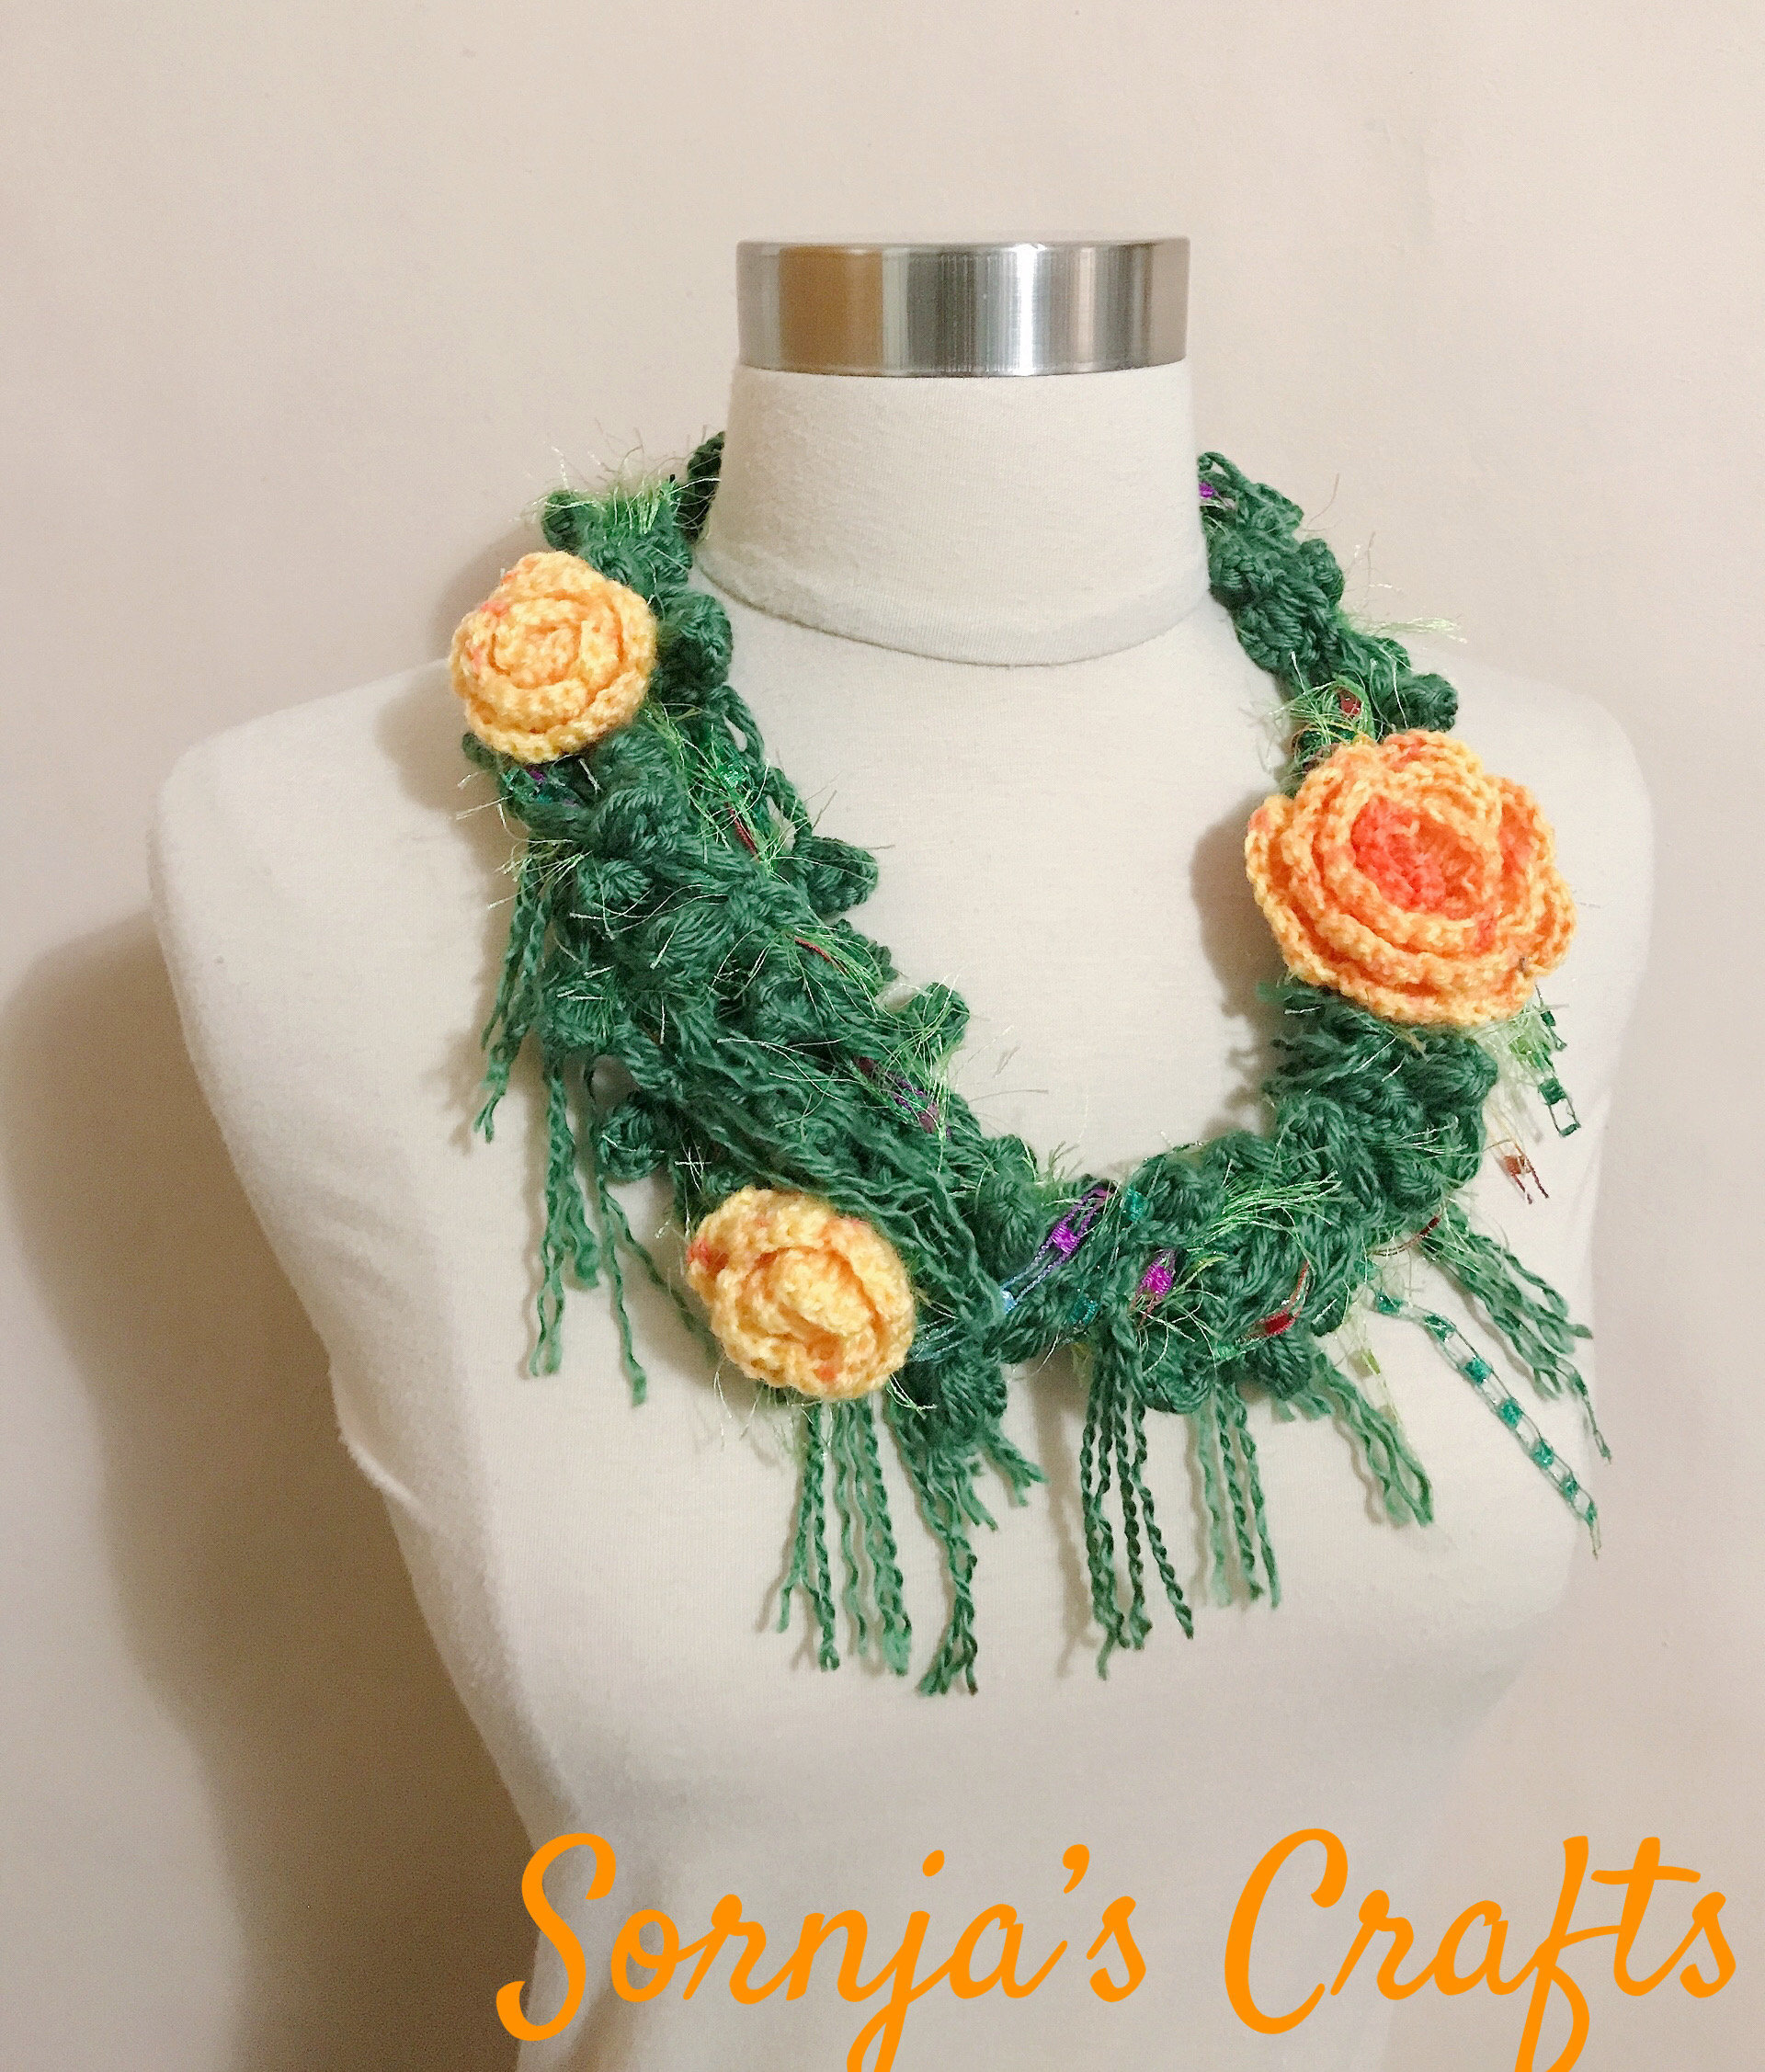 Crochet Scarf  Lariat Pink Yellow Blue Flower Necklace With Green Ivy Floral Accessory Freeform OOAK Spring Fashion Extra Long Skinny S